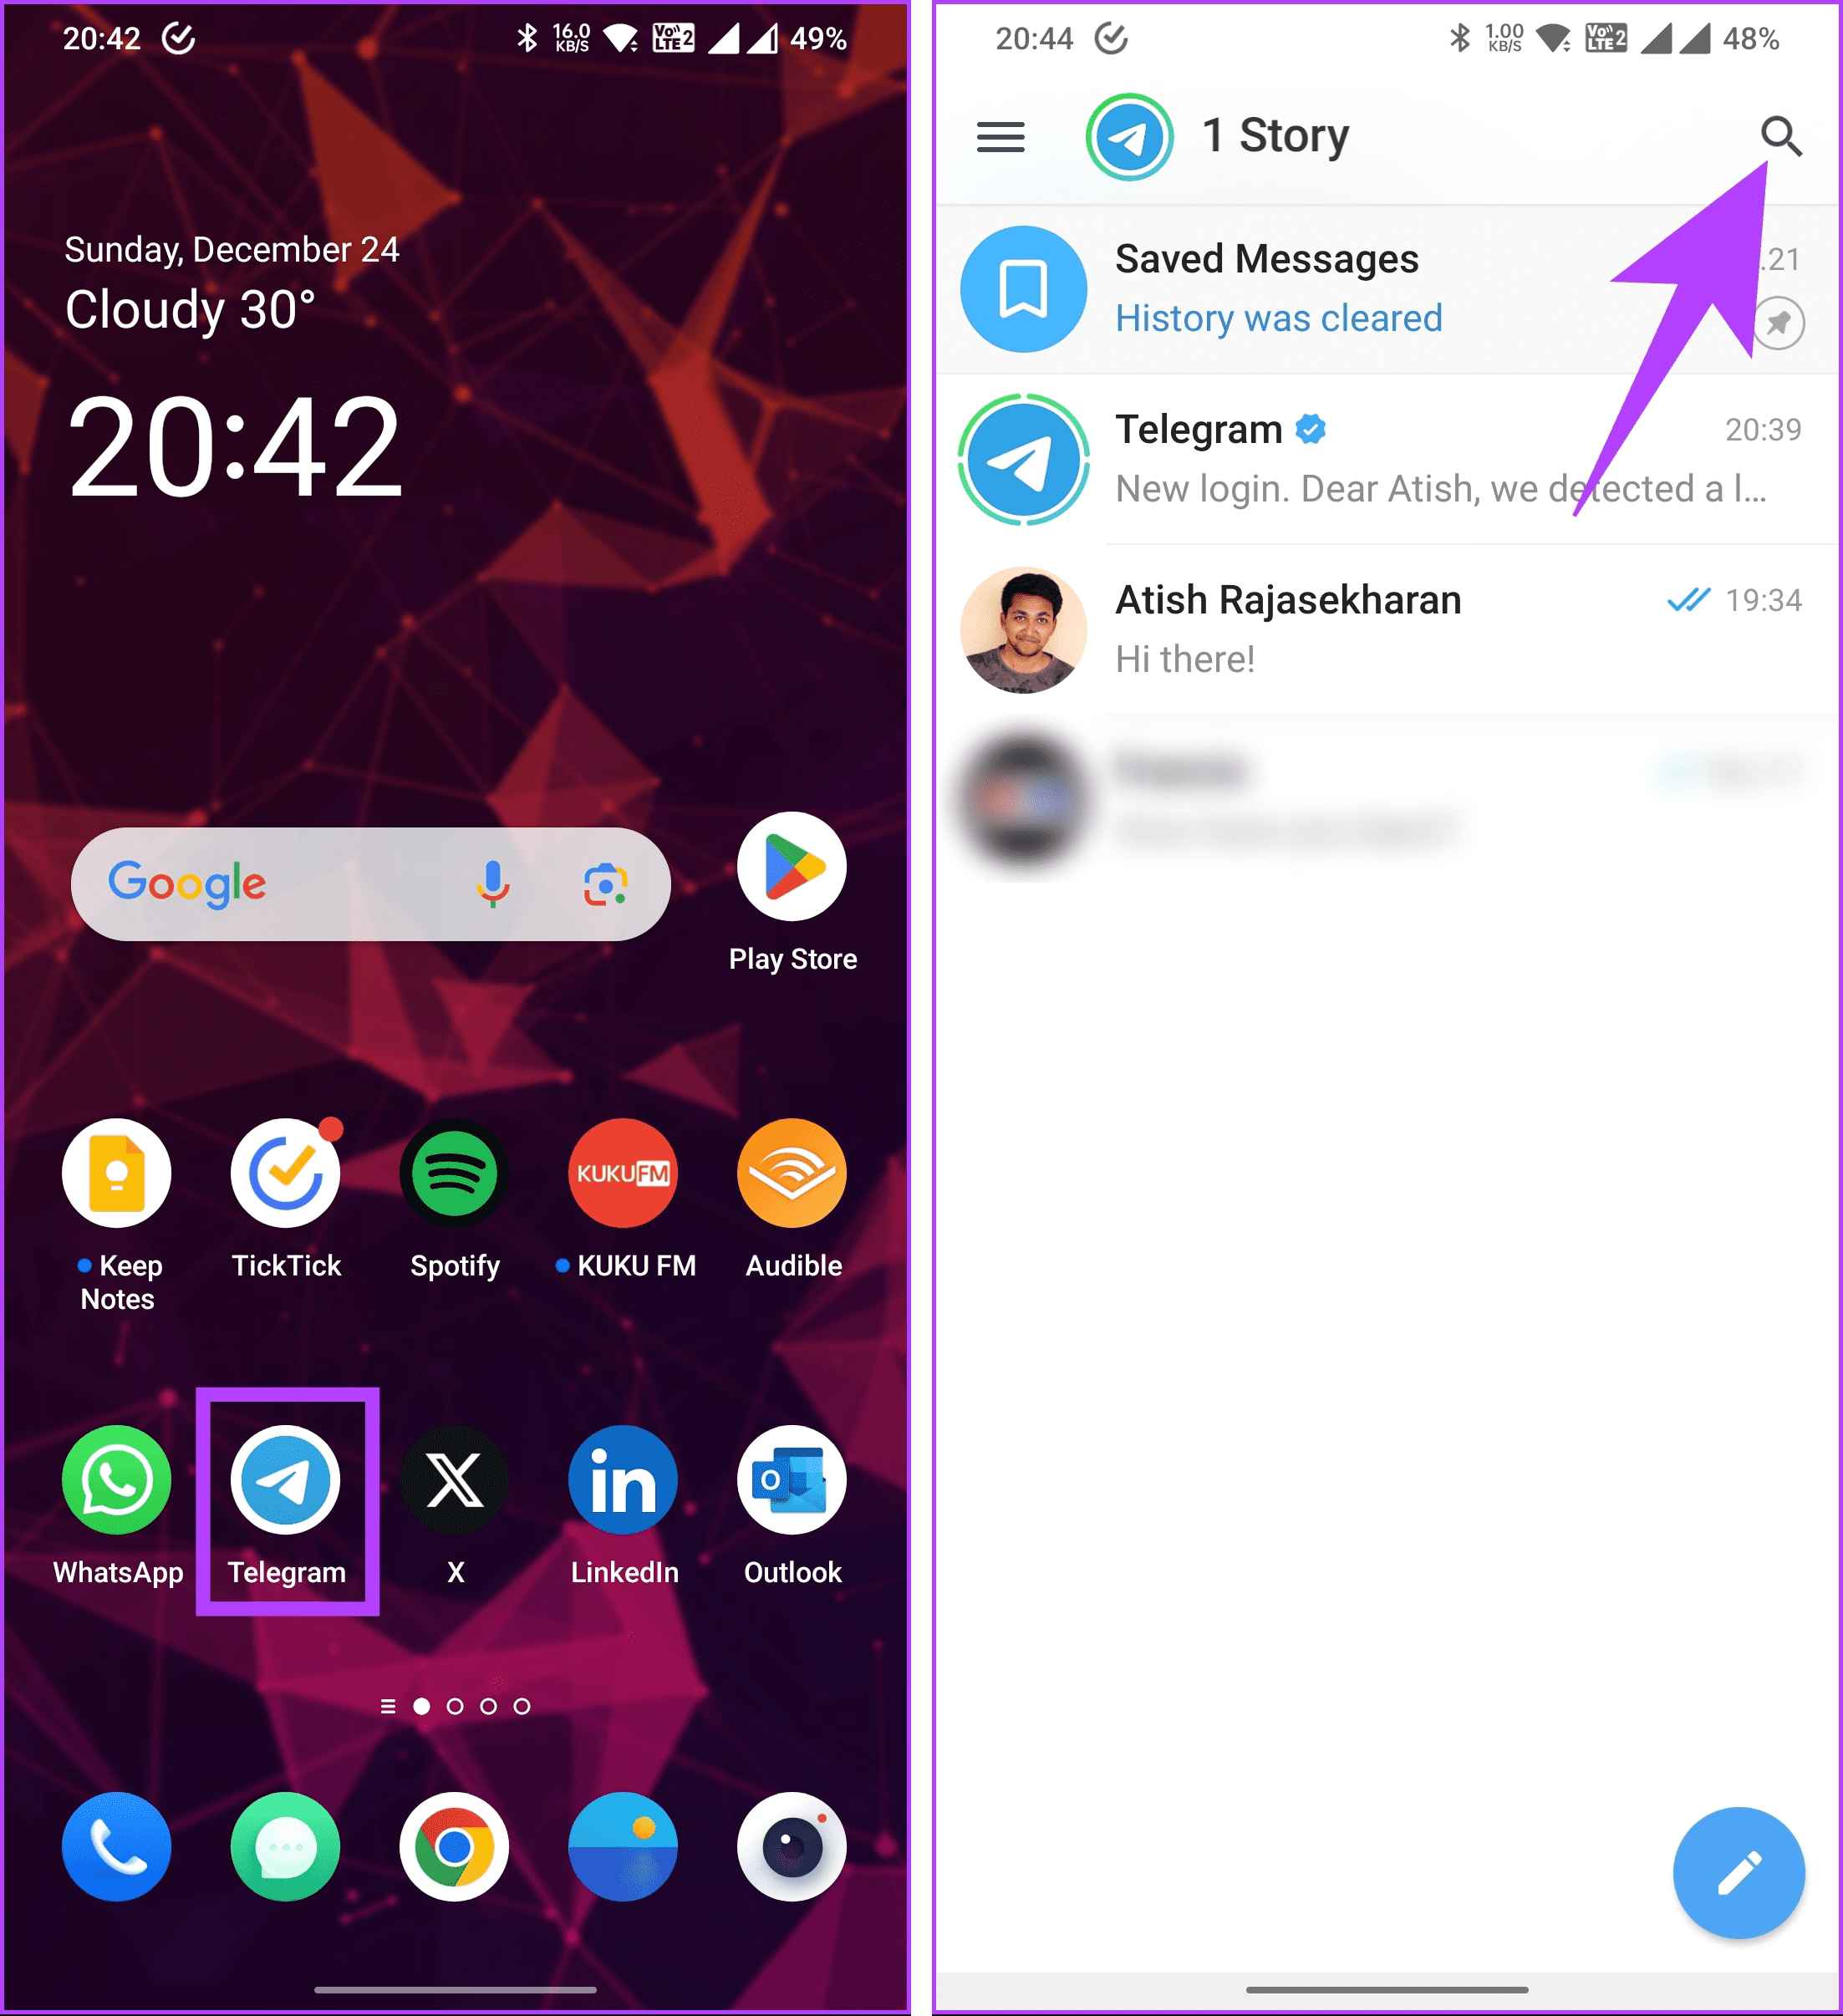 Tap on search icon